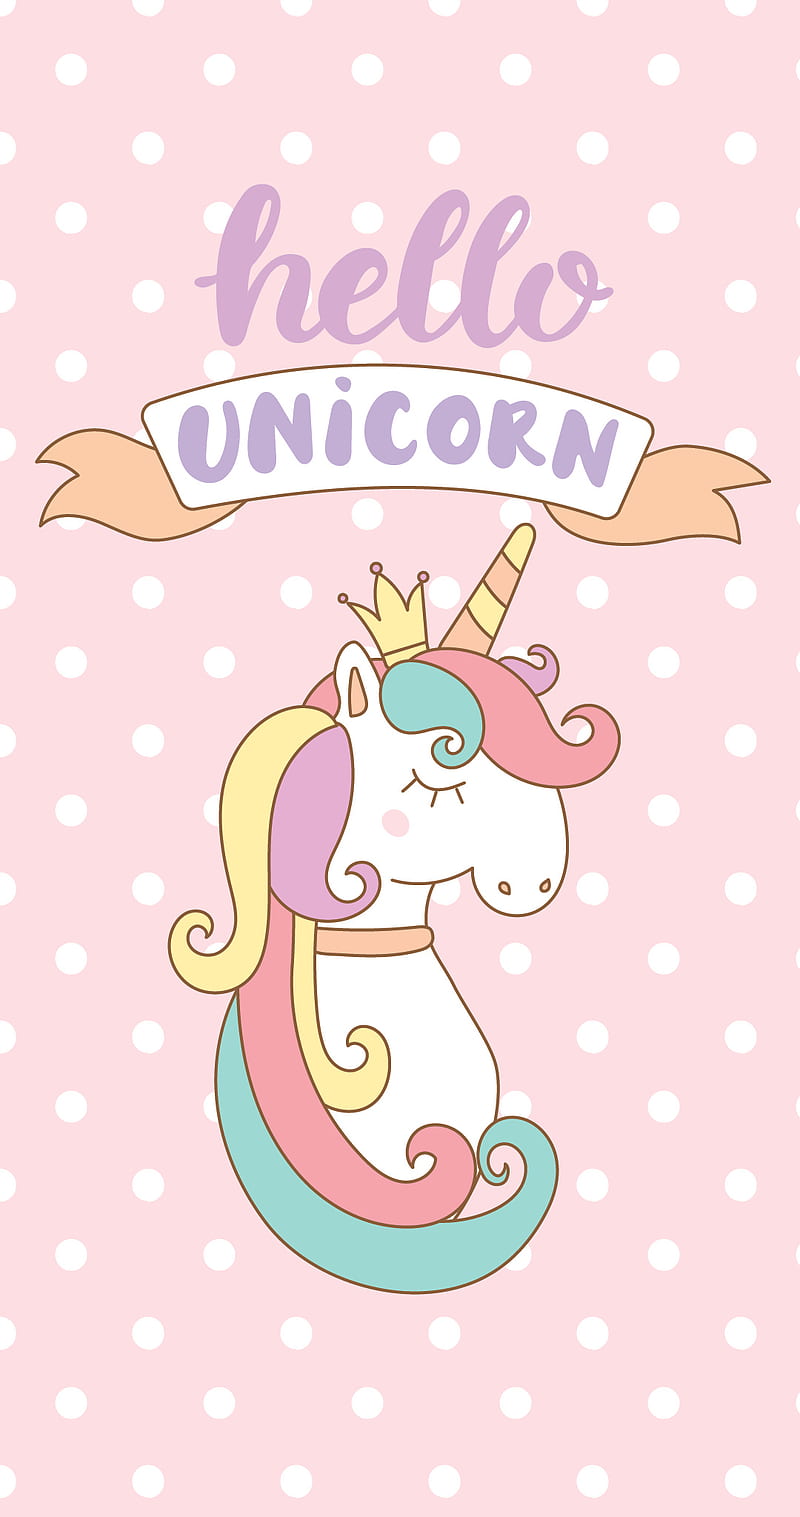 Unicorn ipad, ipad 2, ipad mini for parallax wallpapers hd, desktop  backgrounds 1280x1280, images and pictures